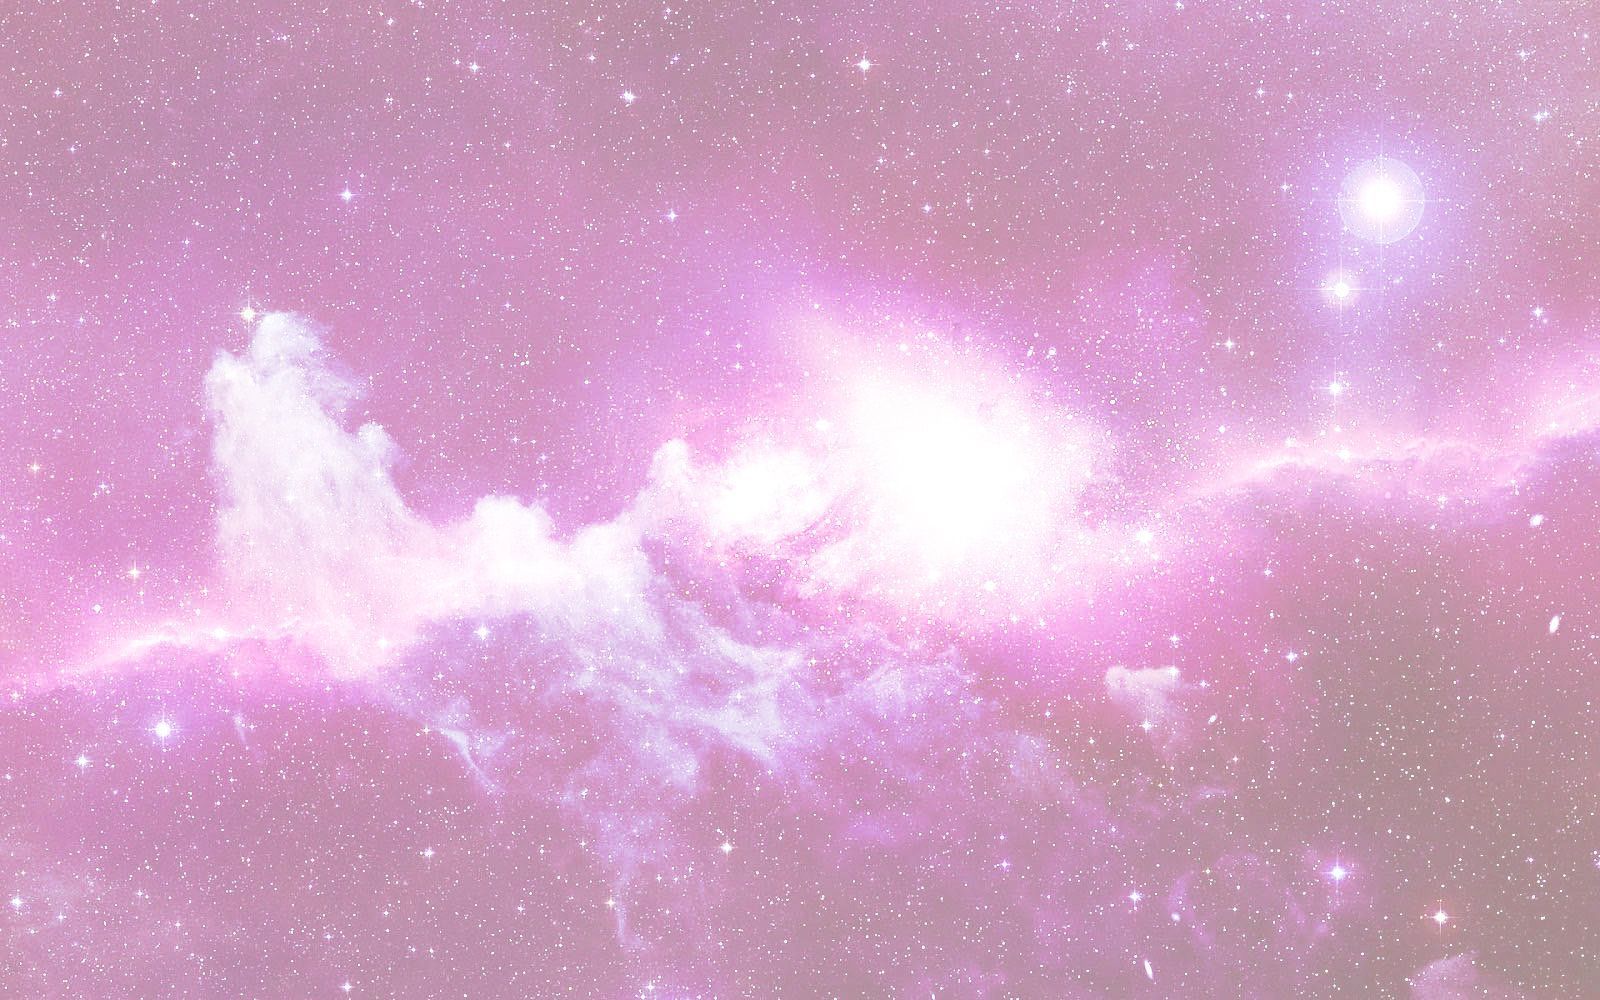 Add some cosmic charm to your computer desktop with our collection of pastel galaxy wallpapers, available now on WallpaperDog. Whether you\'re a astronomy enthusiast or simply love the dreamy beauty of outer space, these images are sure to captivate and inspire.